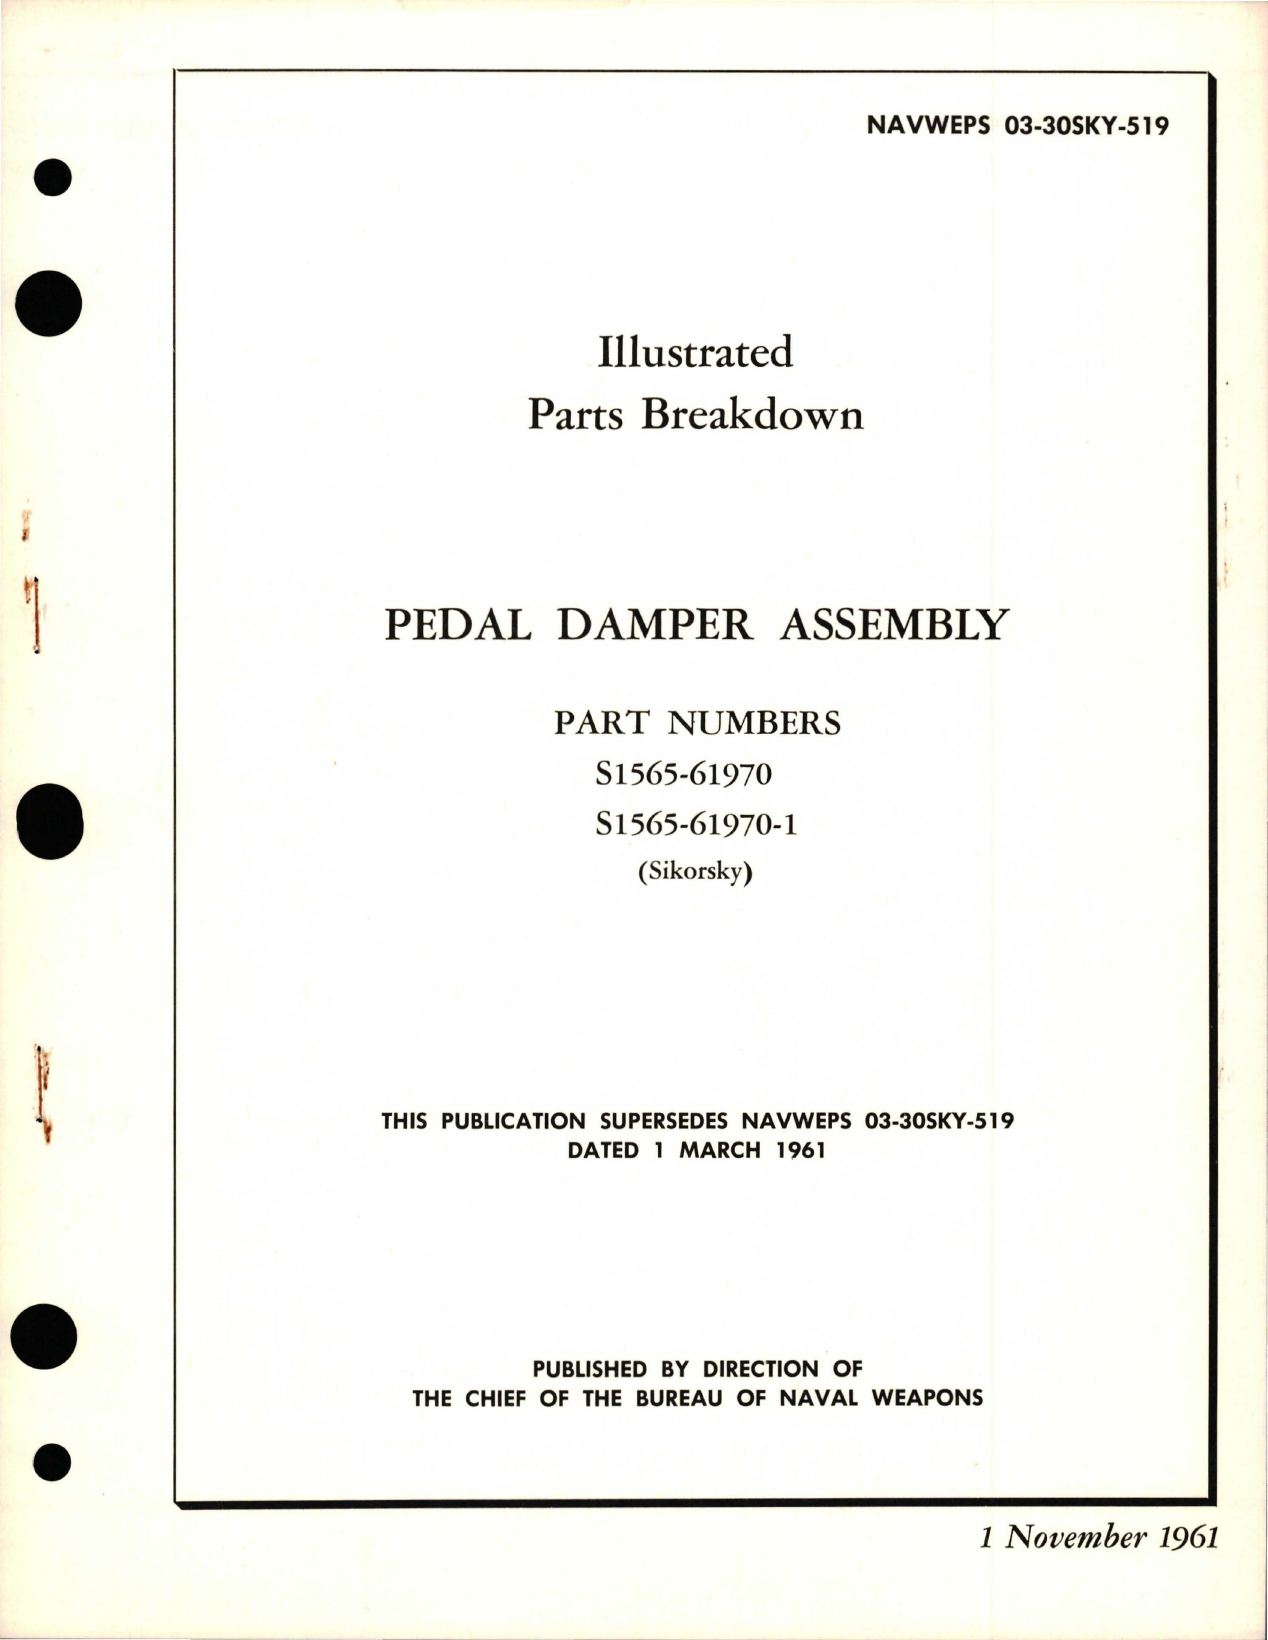 Sample page 1 from AirCorps Library document: Illustrated Parts Breakdown for Pedal Damper Assembly - Part S1565-61970 and S1565-61970-1